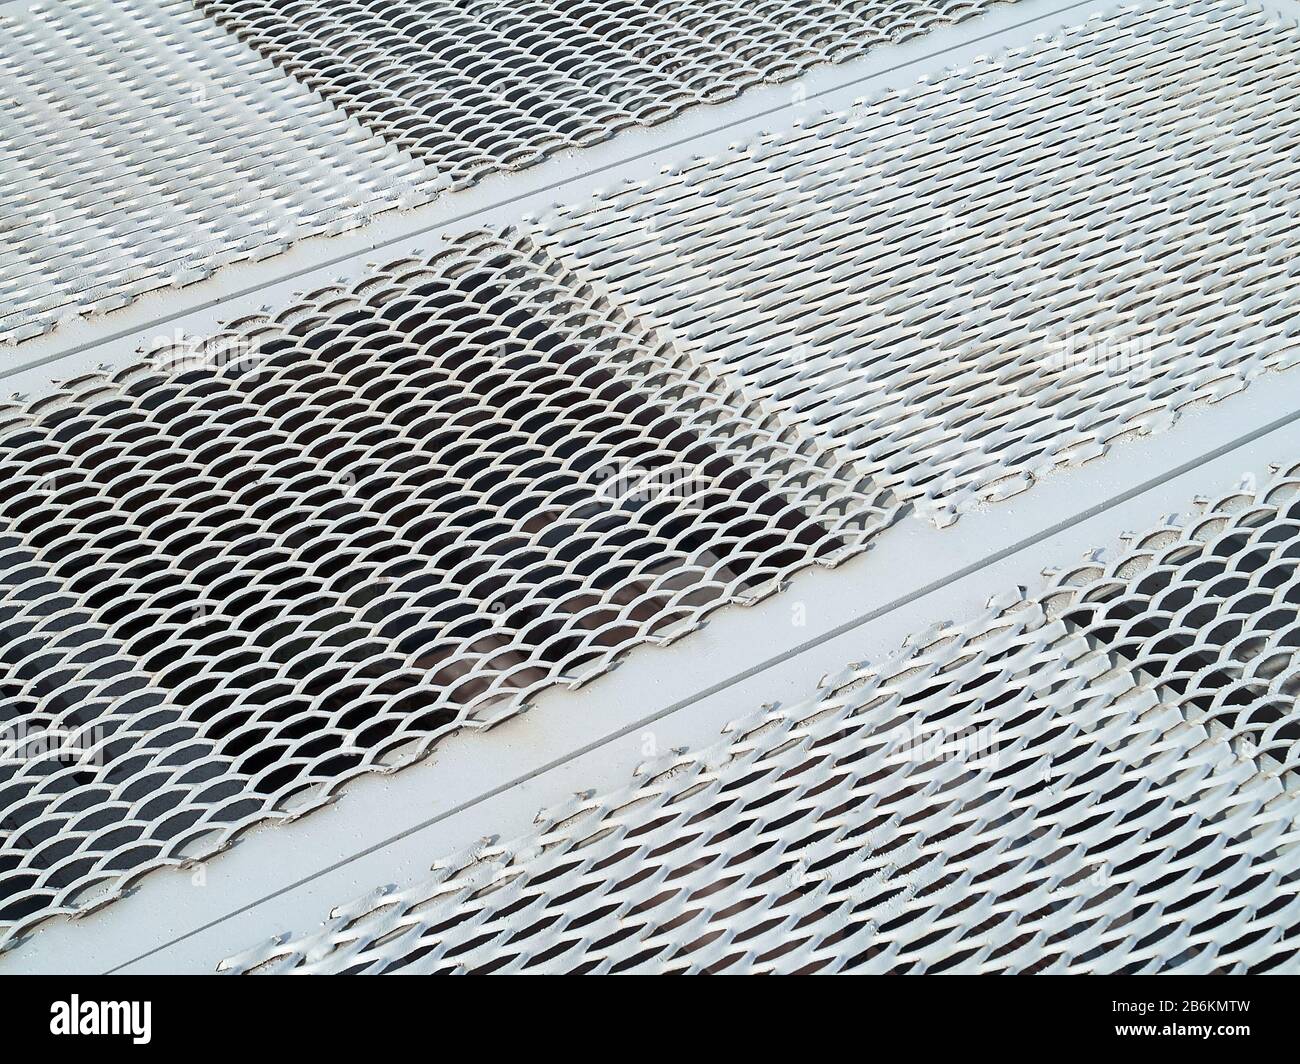 Perforated Metal Sheet High Resolution Stock Photography And Images Alamy